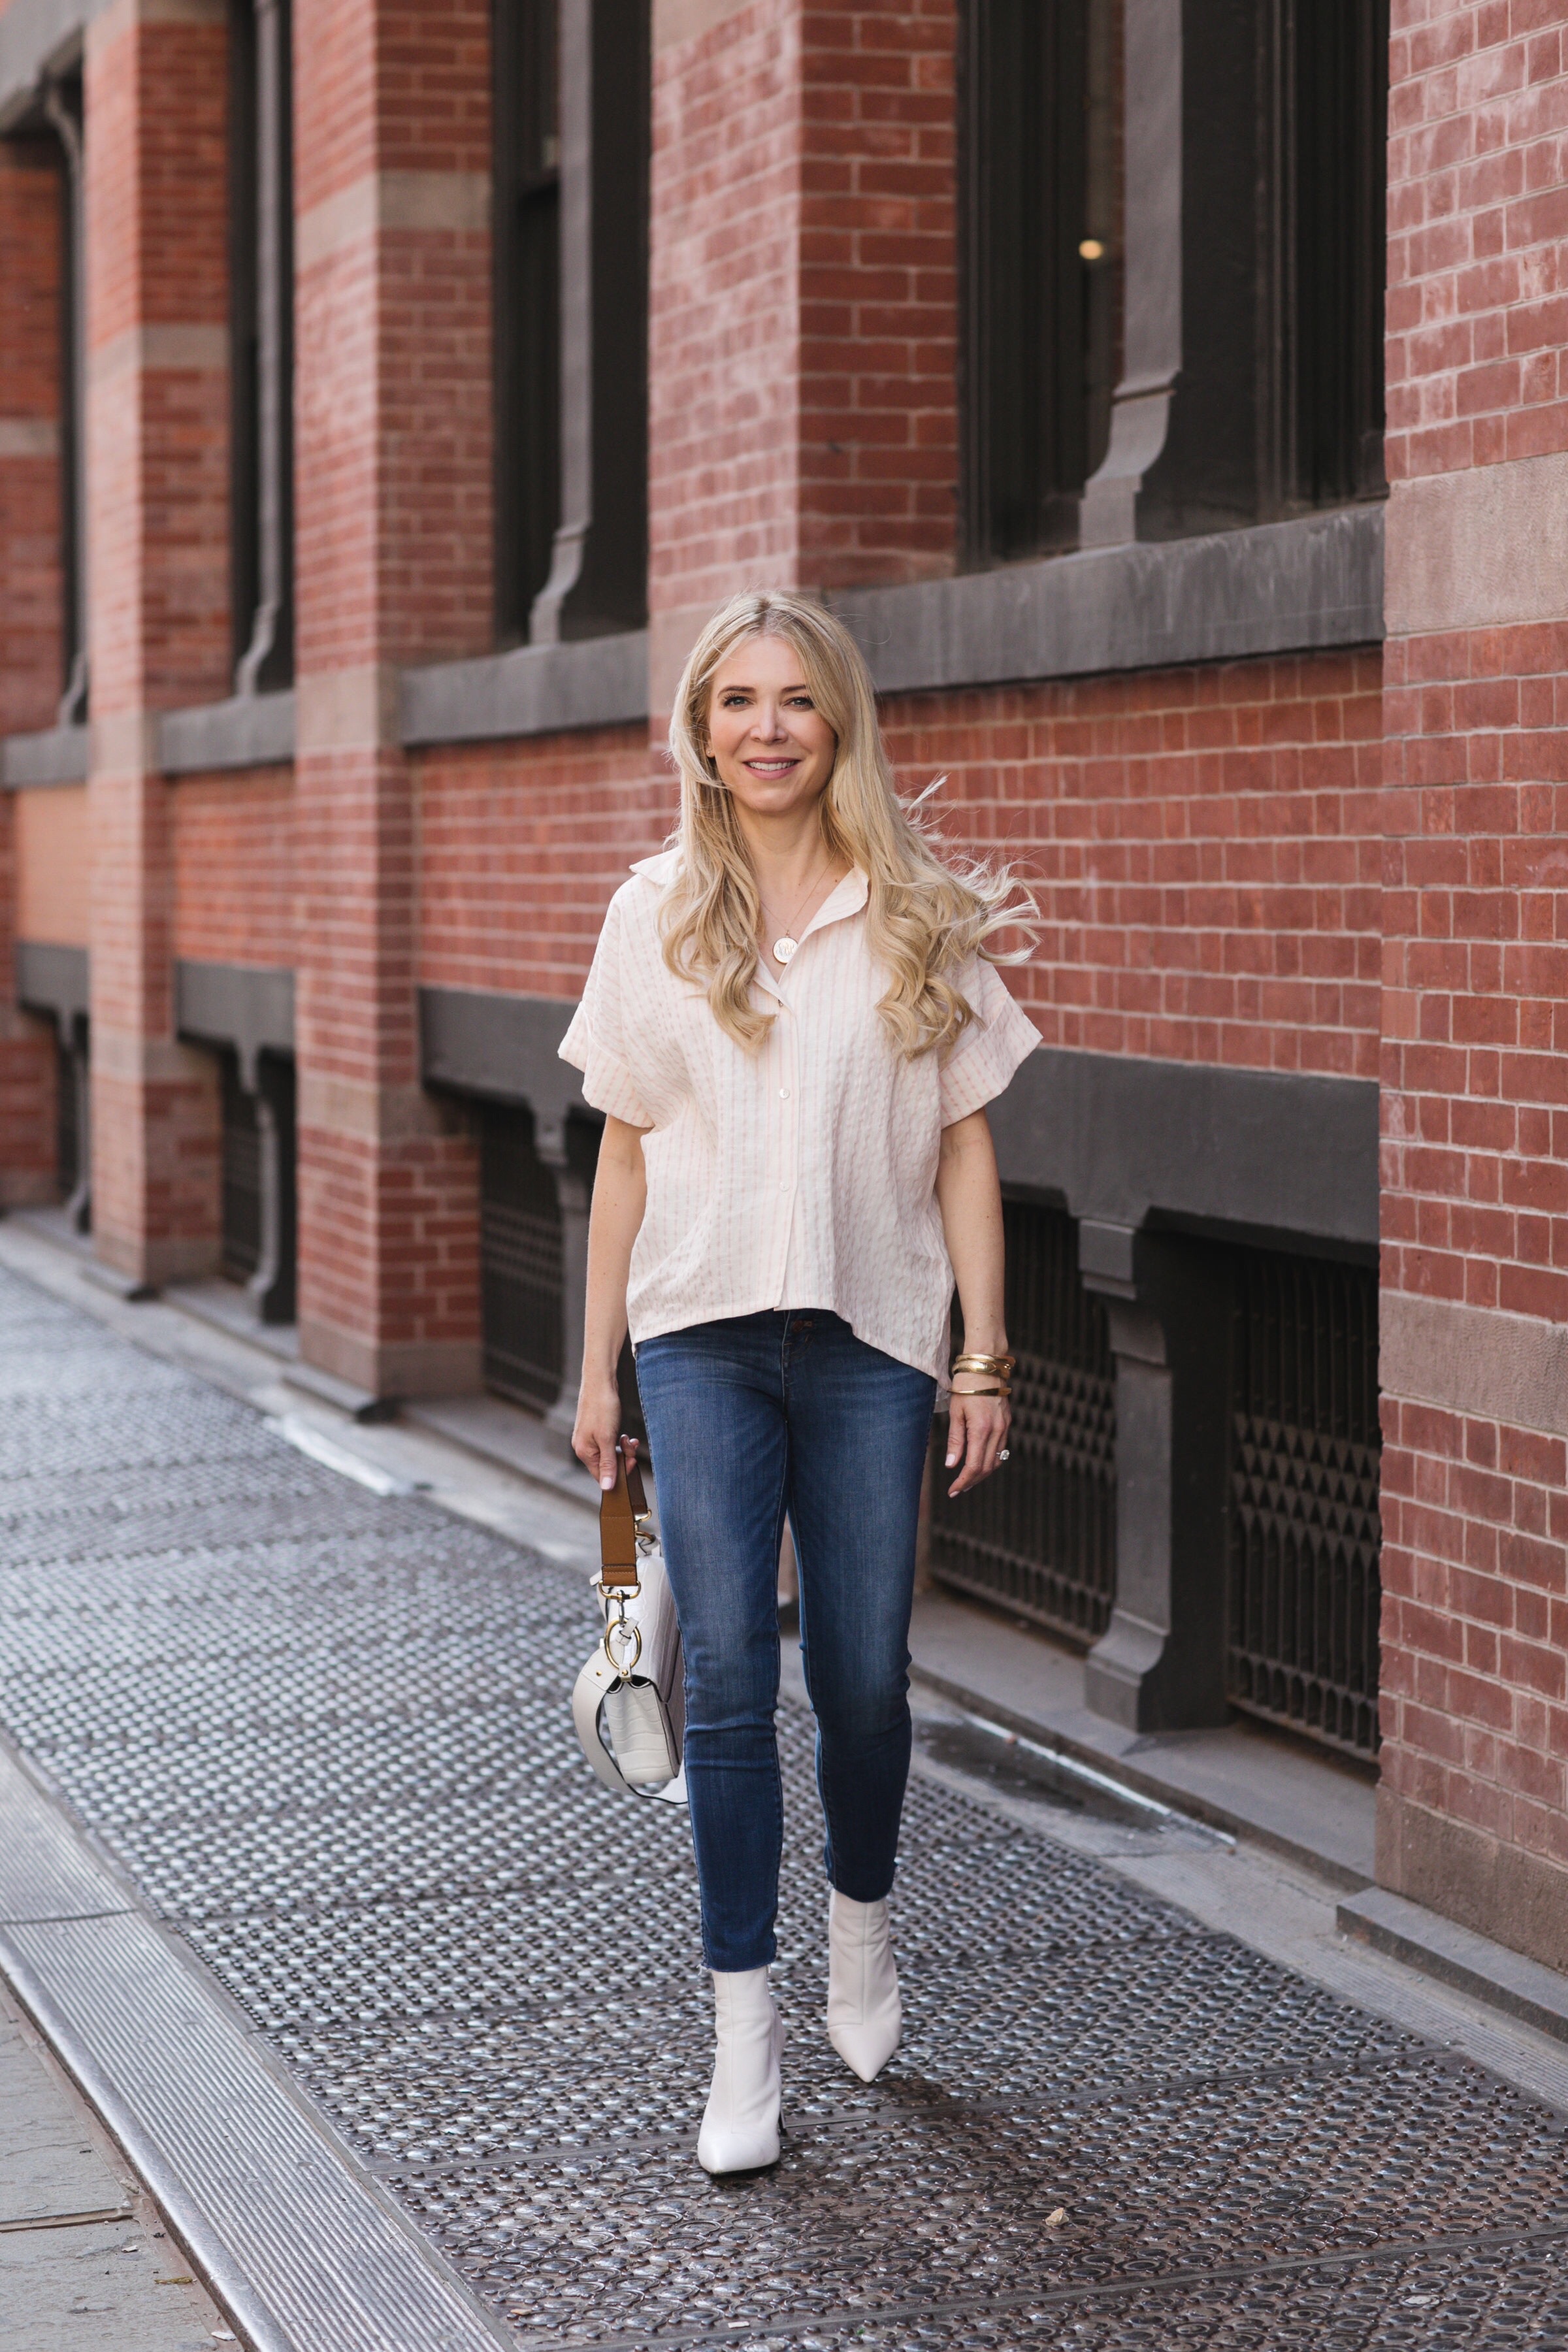 NYC Fashion Blogger, NYC Street Style, About the Outfits, Laura Bonner